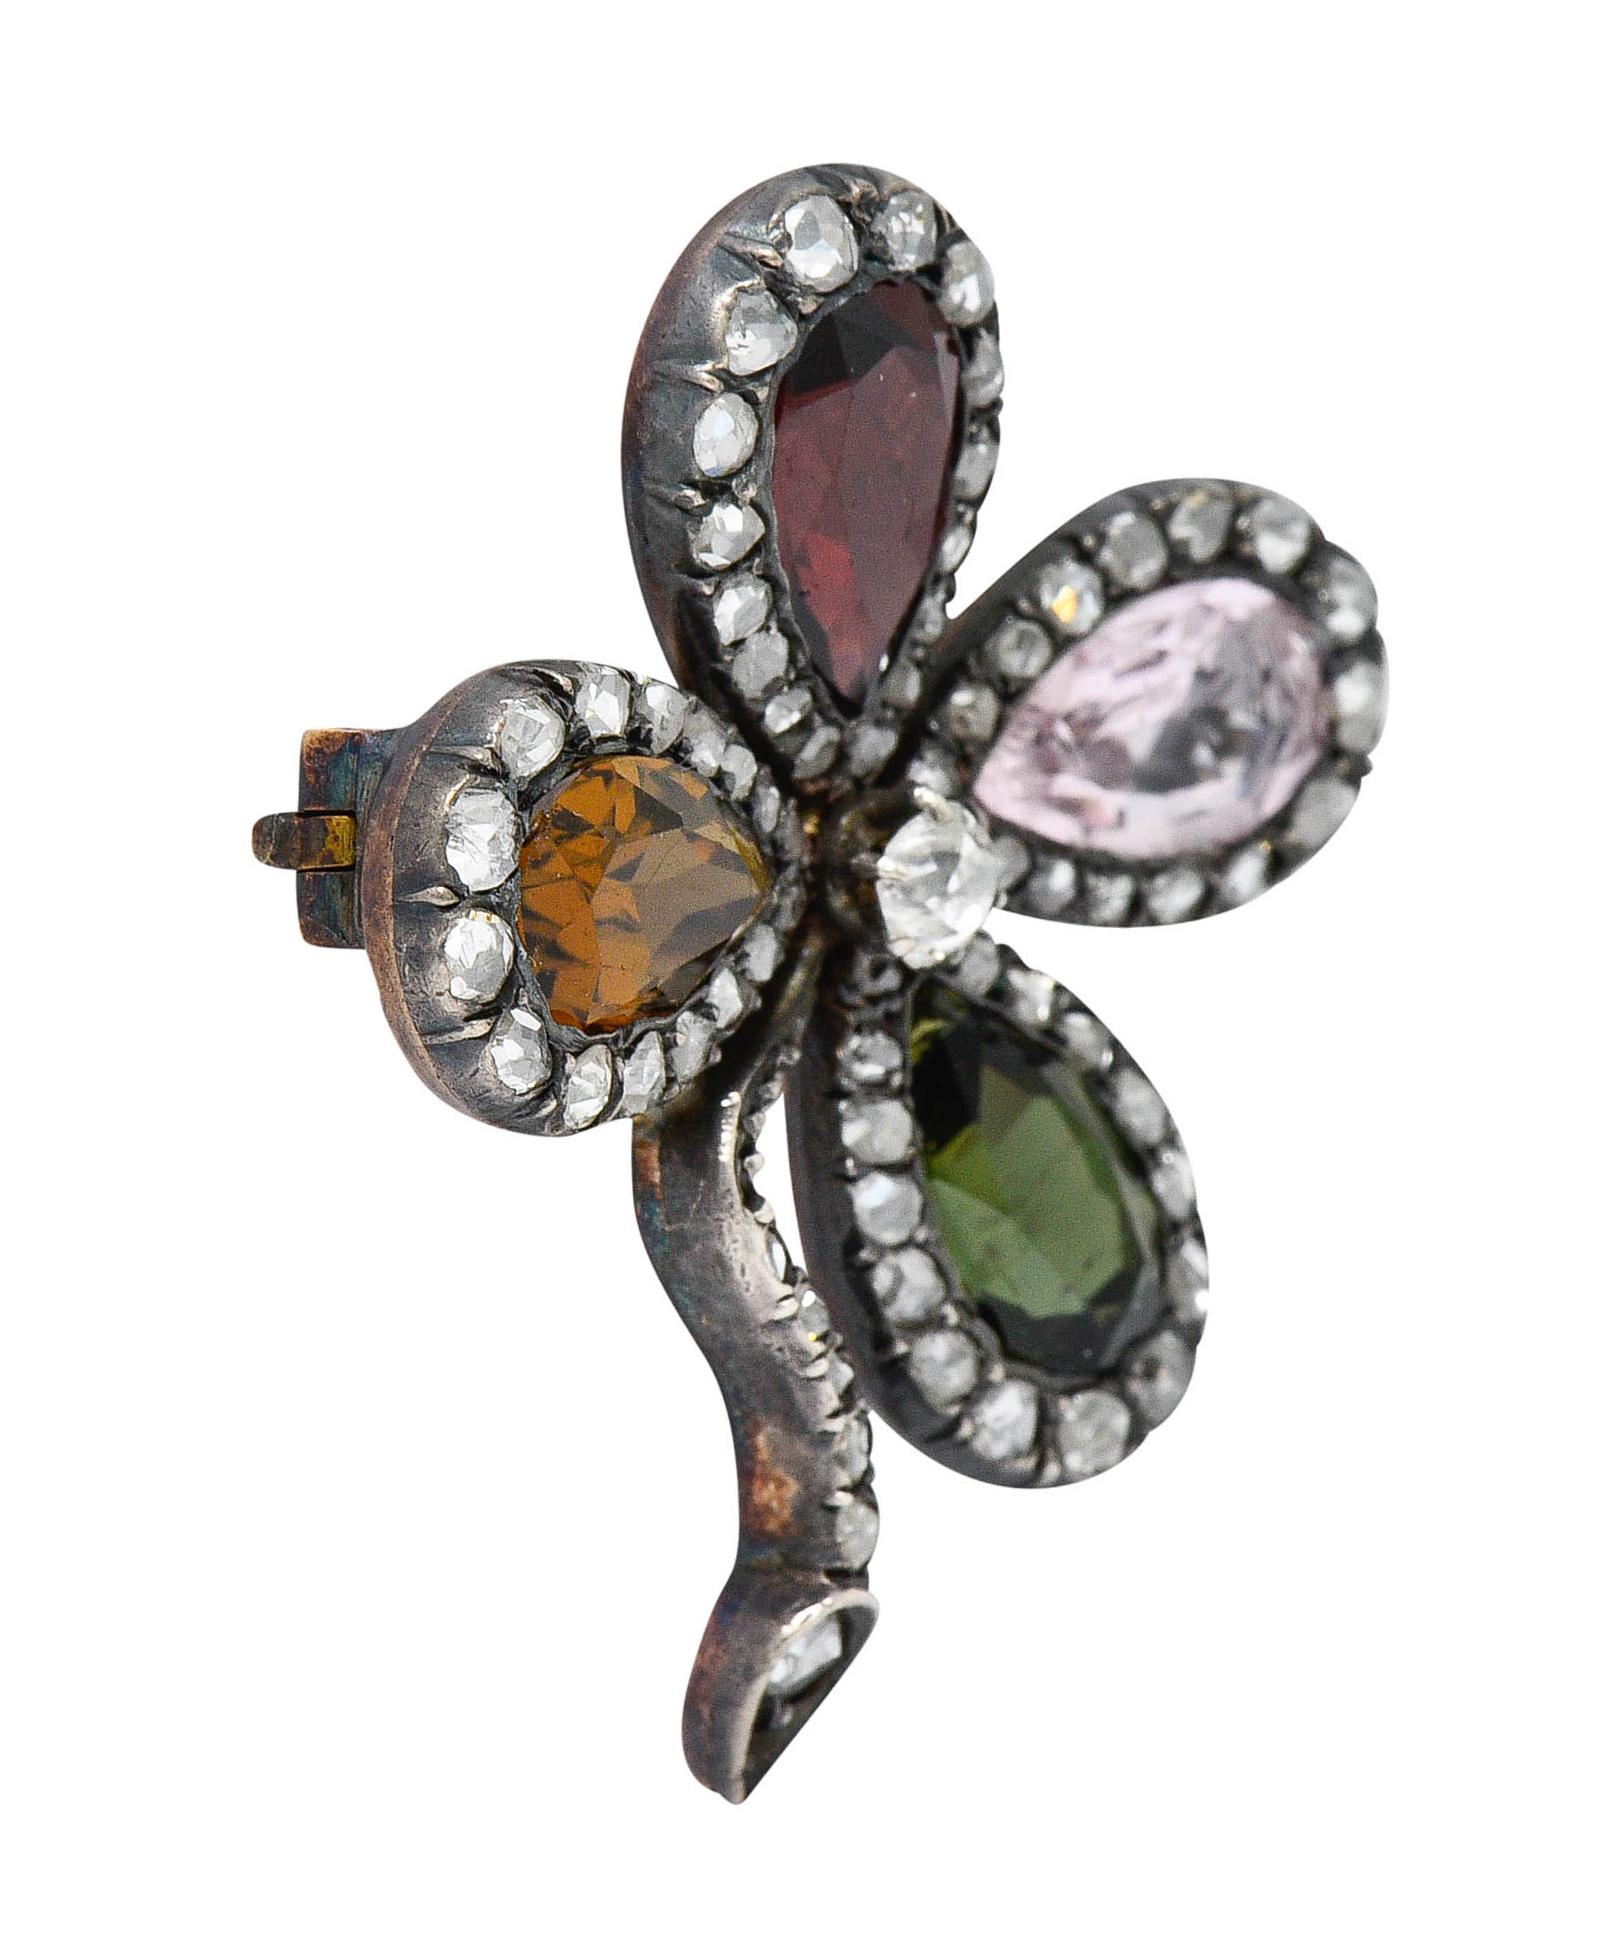 Brooch is designed as a stylized four leaf clover with each petal as a pear cut gemstone

Garnet, Tourmaline, and others - measuring approximately 9.3 x 5.5 mm

Centering an old mine cut diamond weighing approximately 0.15 carat - J/K color with SI